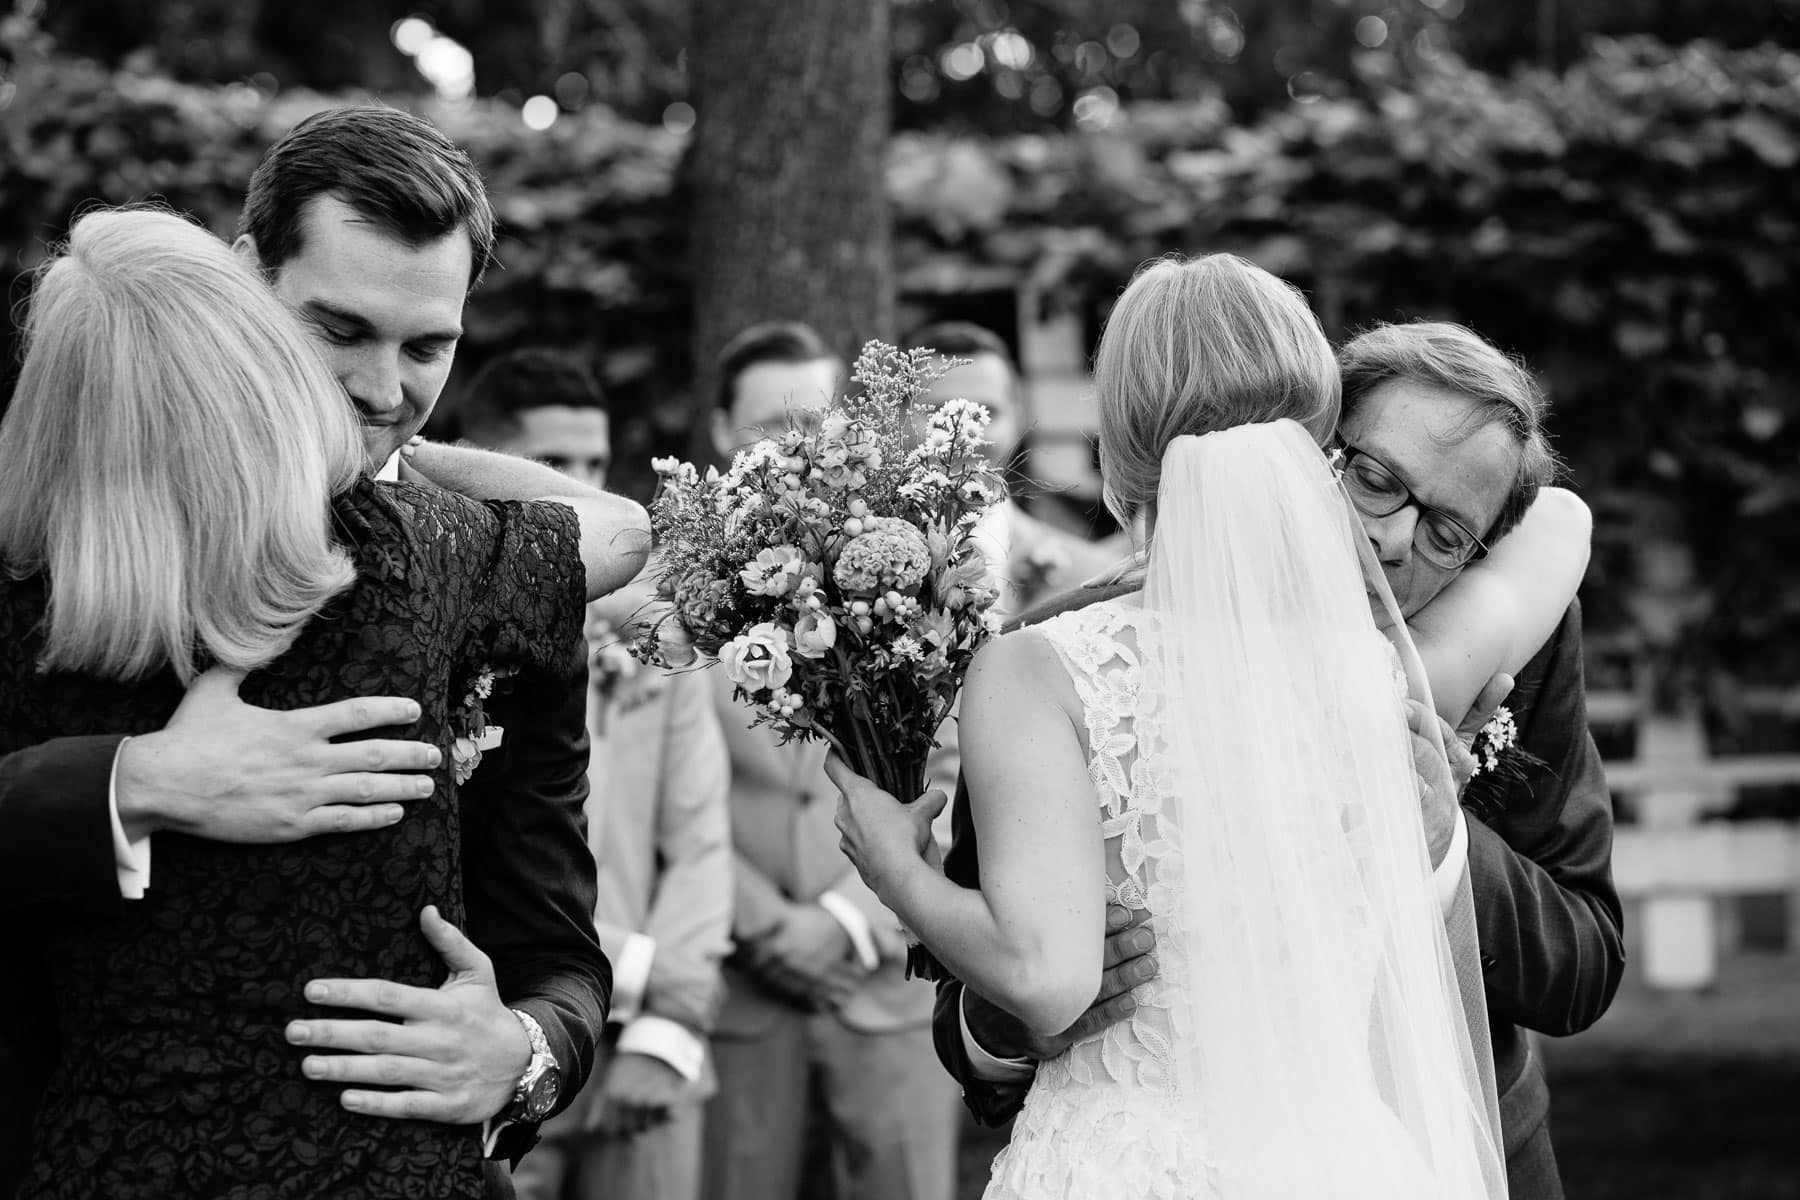 exchanging hugs during the wedding ceremony | Kelly Benvenuto Photography